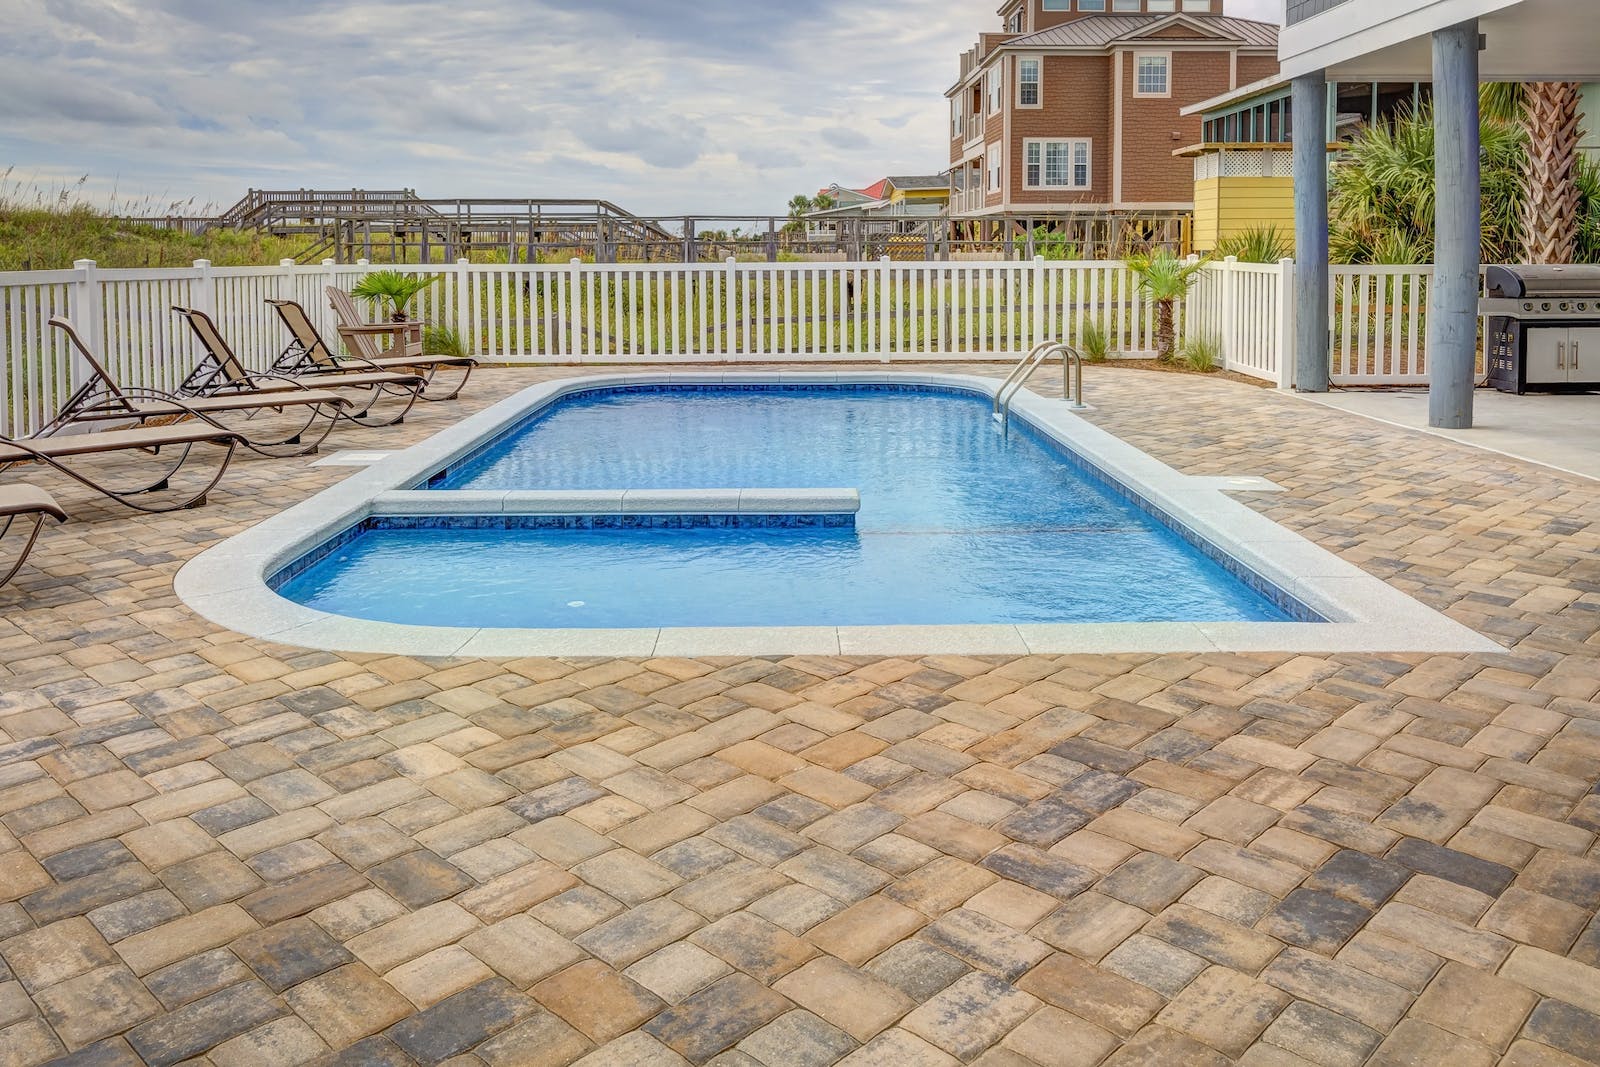 Does An In-Ground Swimming Pool Add Value To My Home?